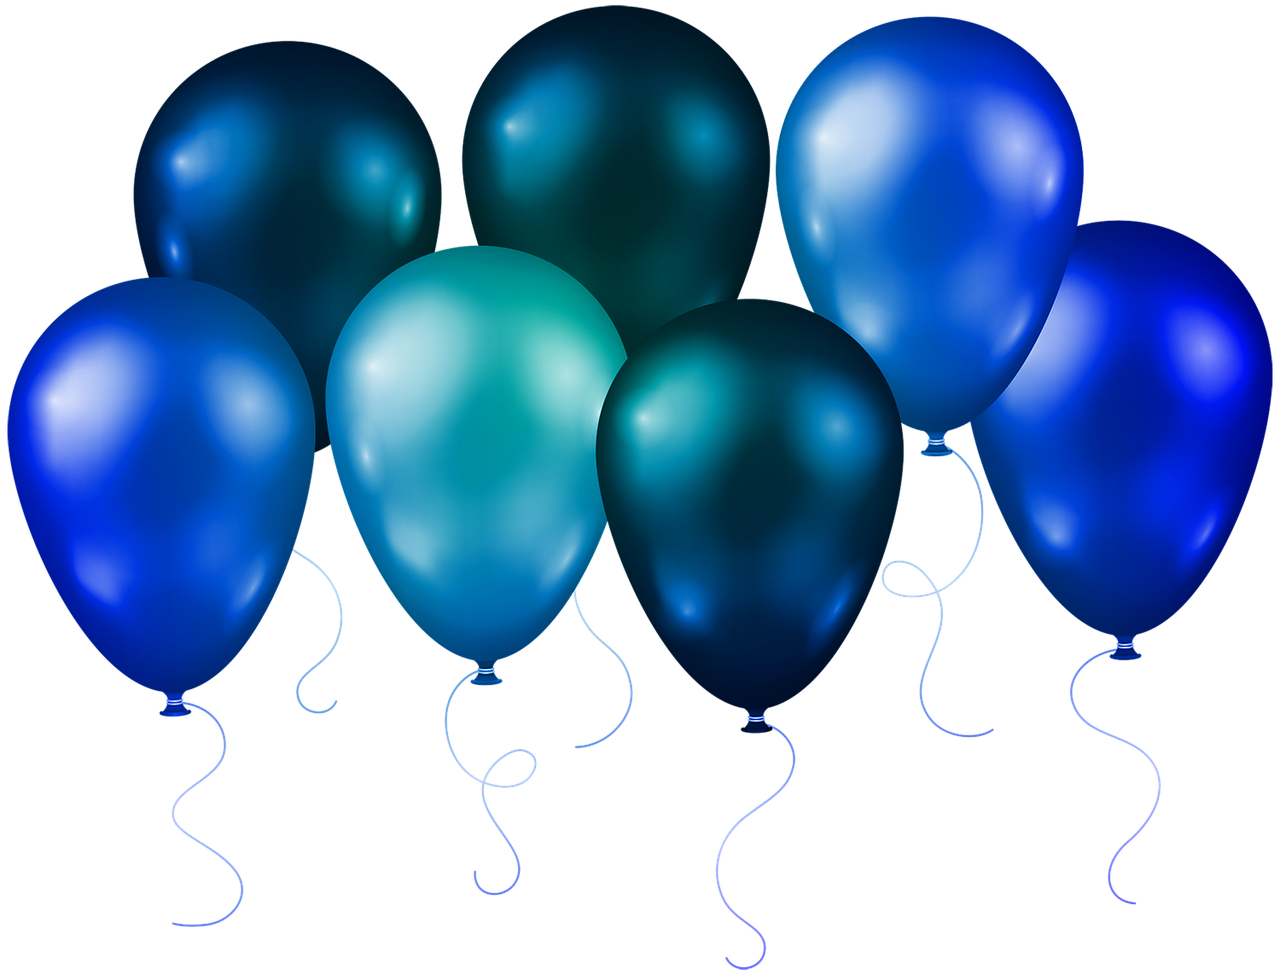 Balloons, blue balloons, streamers, balloon dog, colorful - free image ...